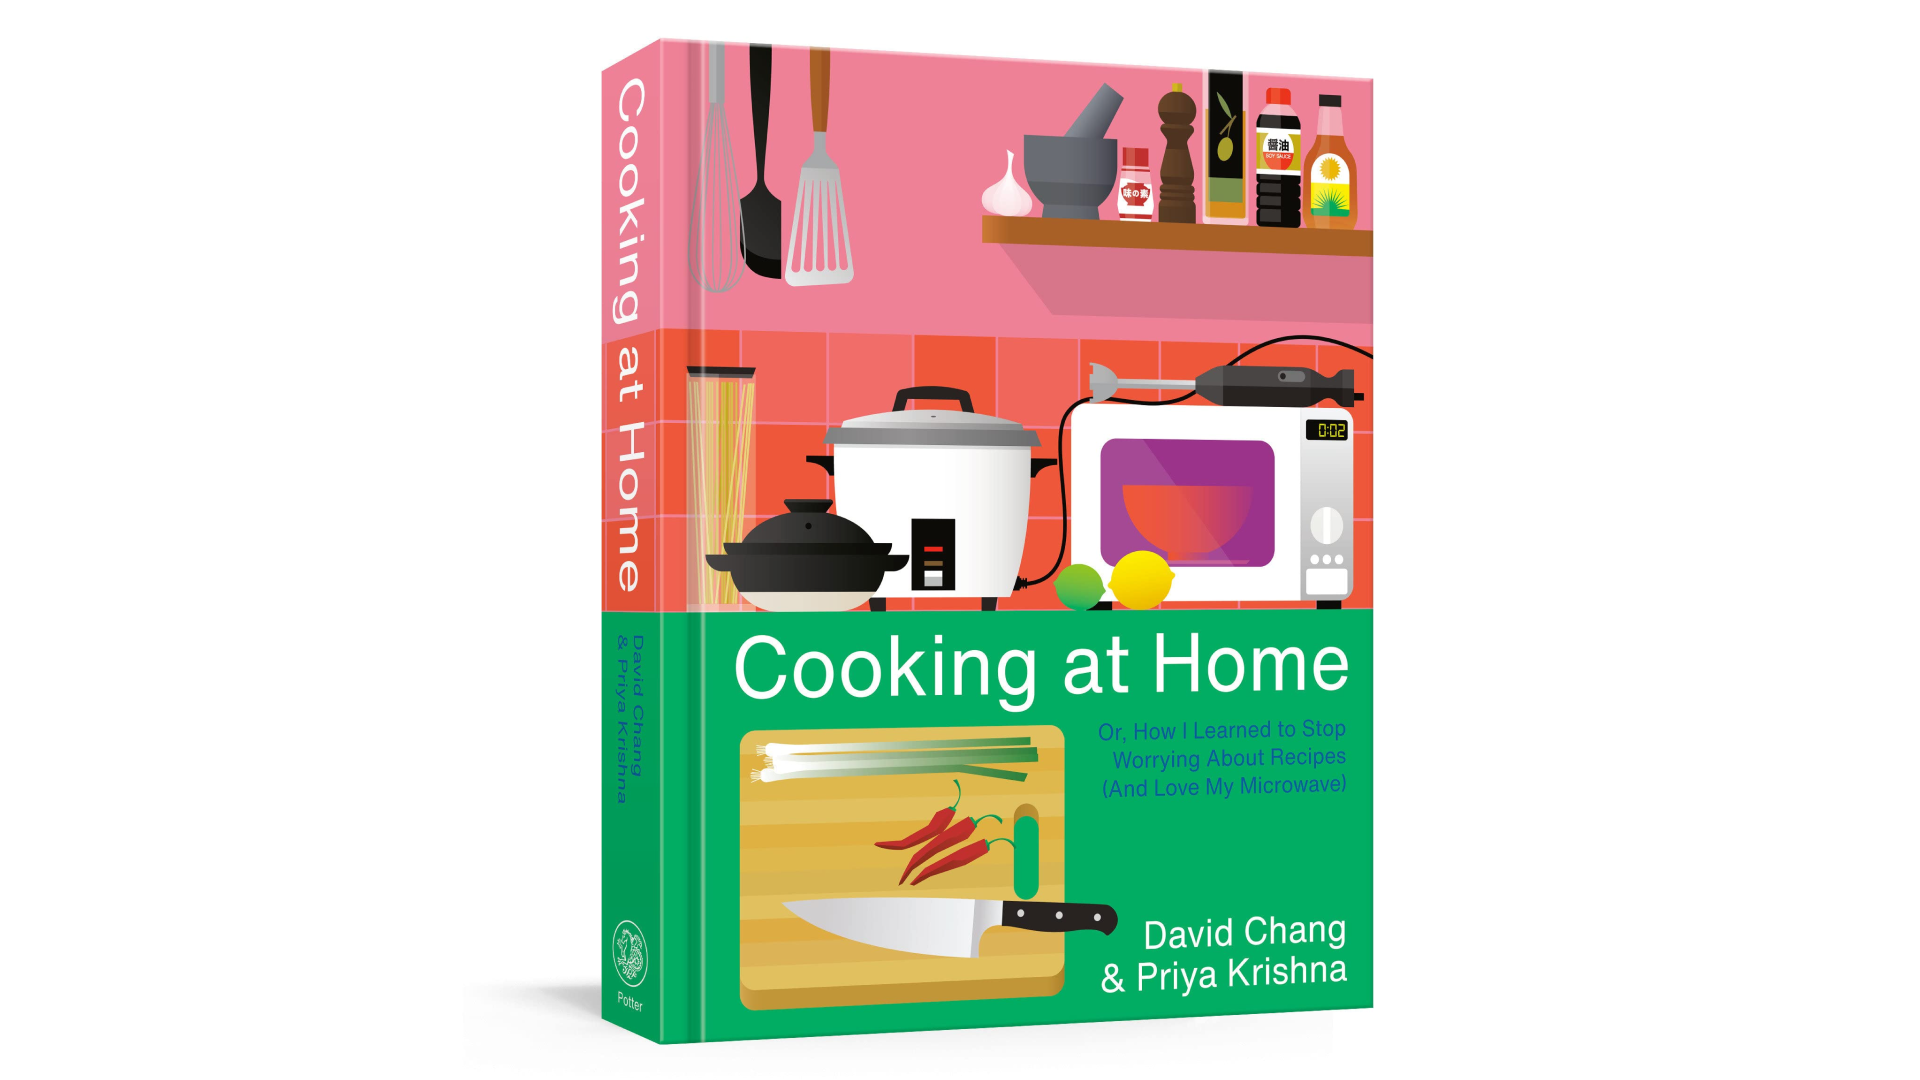 "Cooking at Home" cookbook